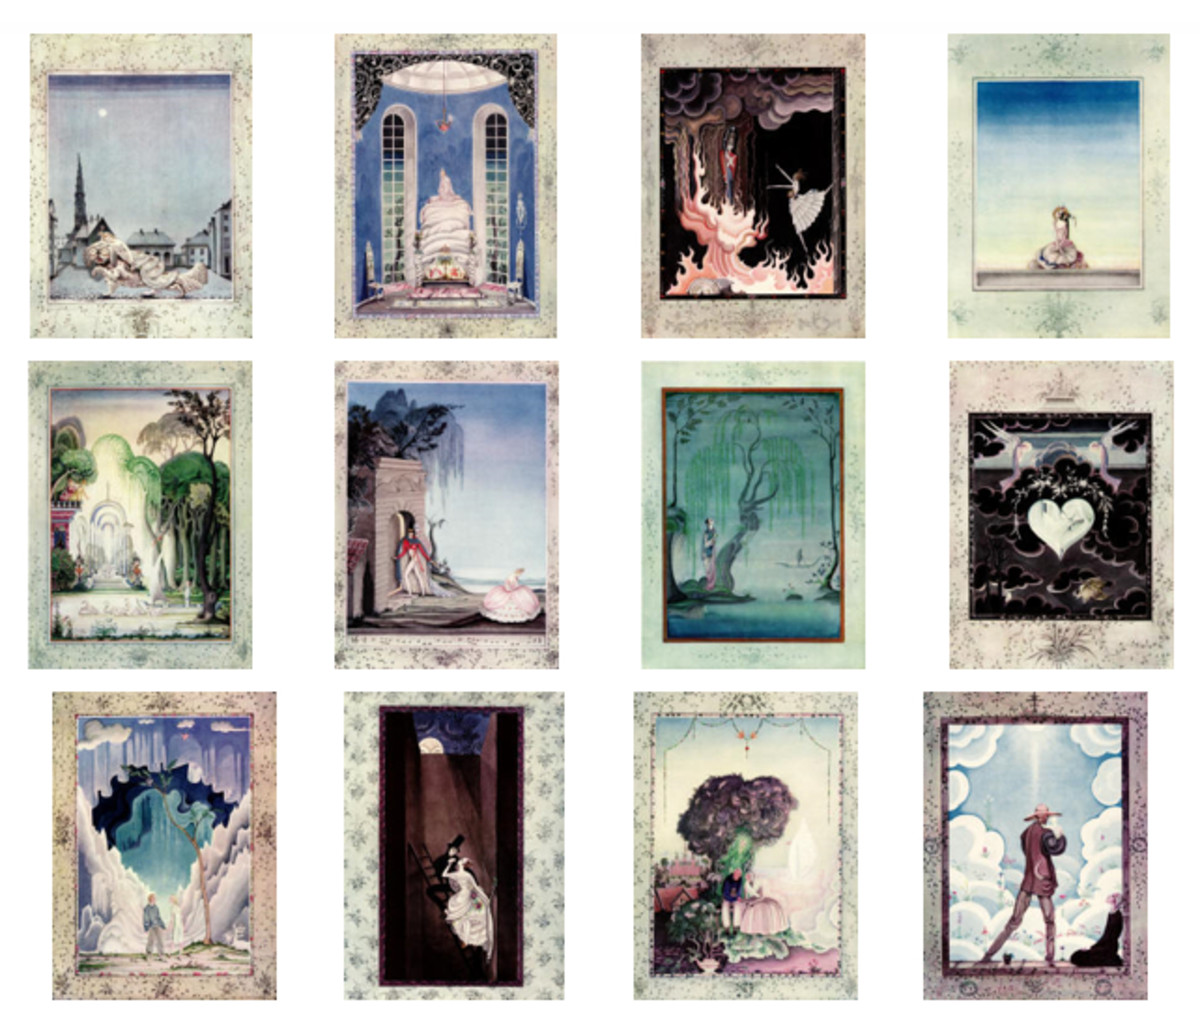 Here we show each of the color designs by Kay Nielsen from his suite for 